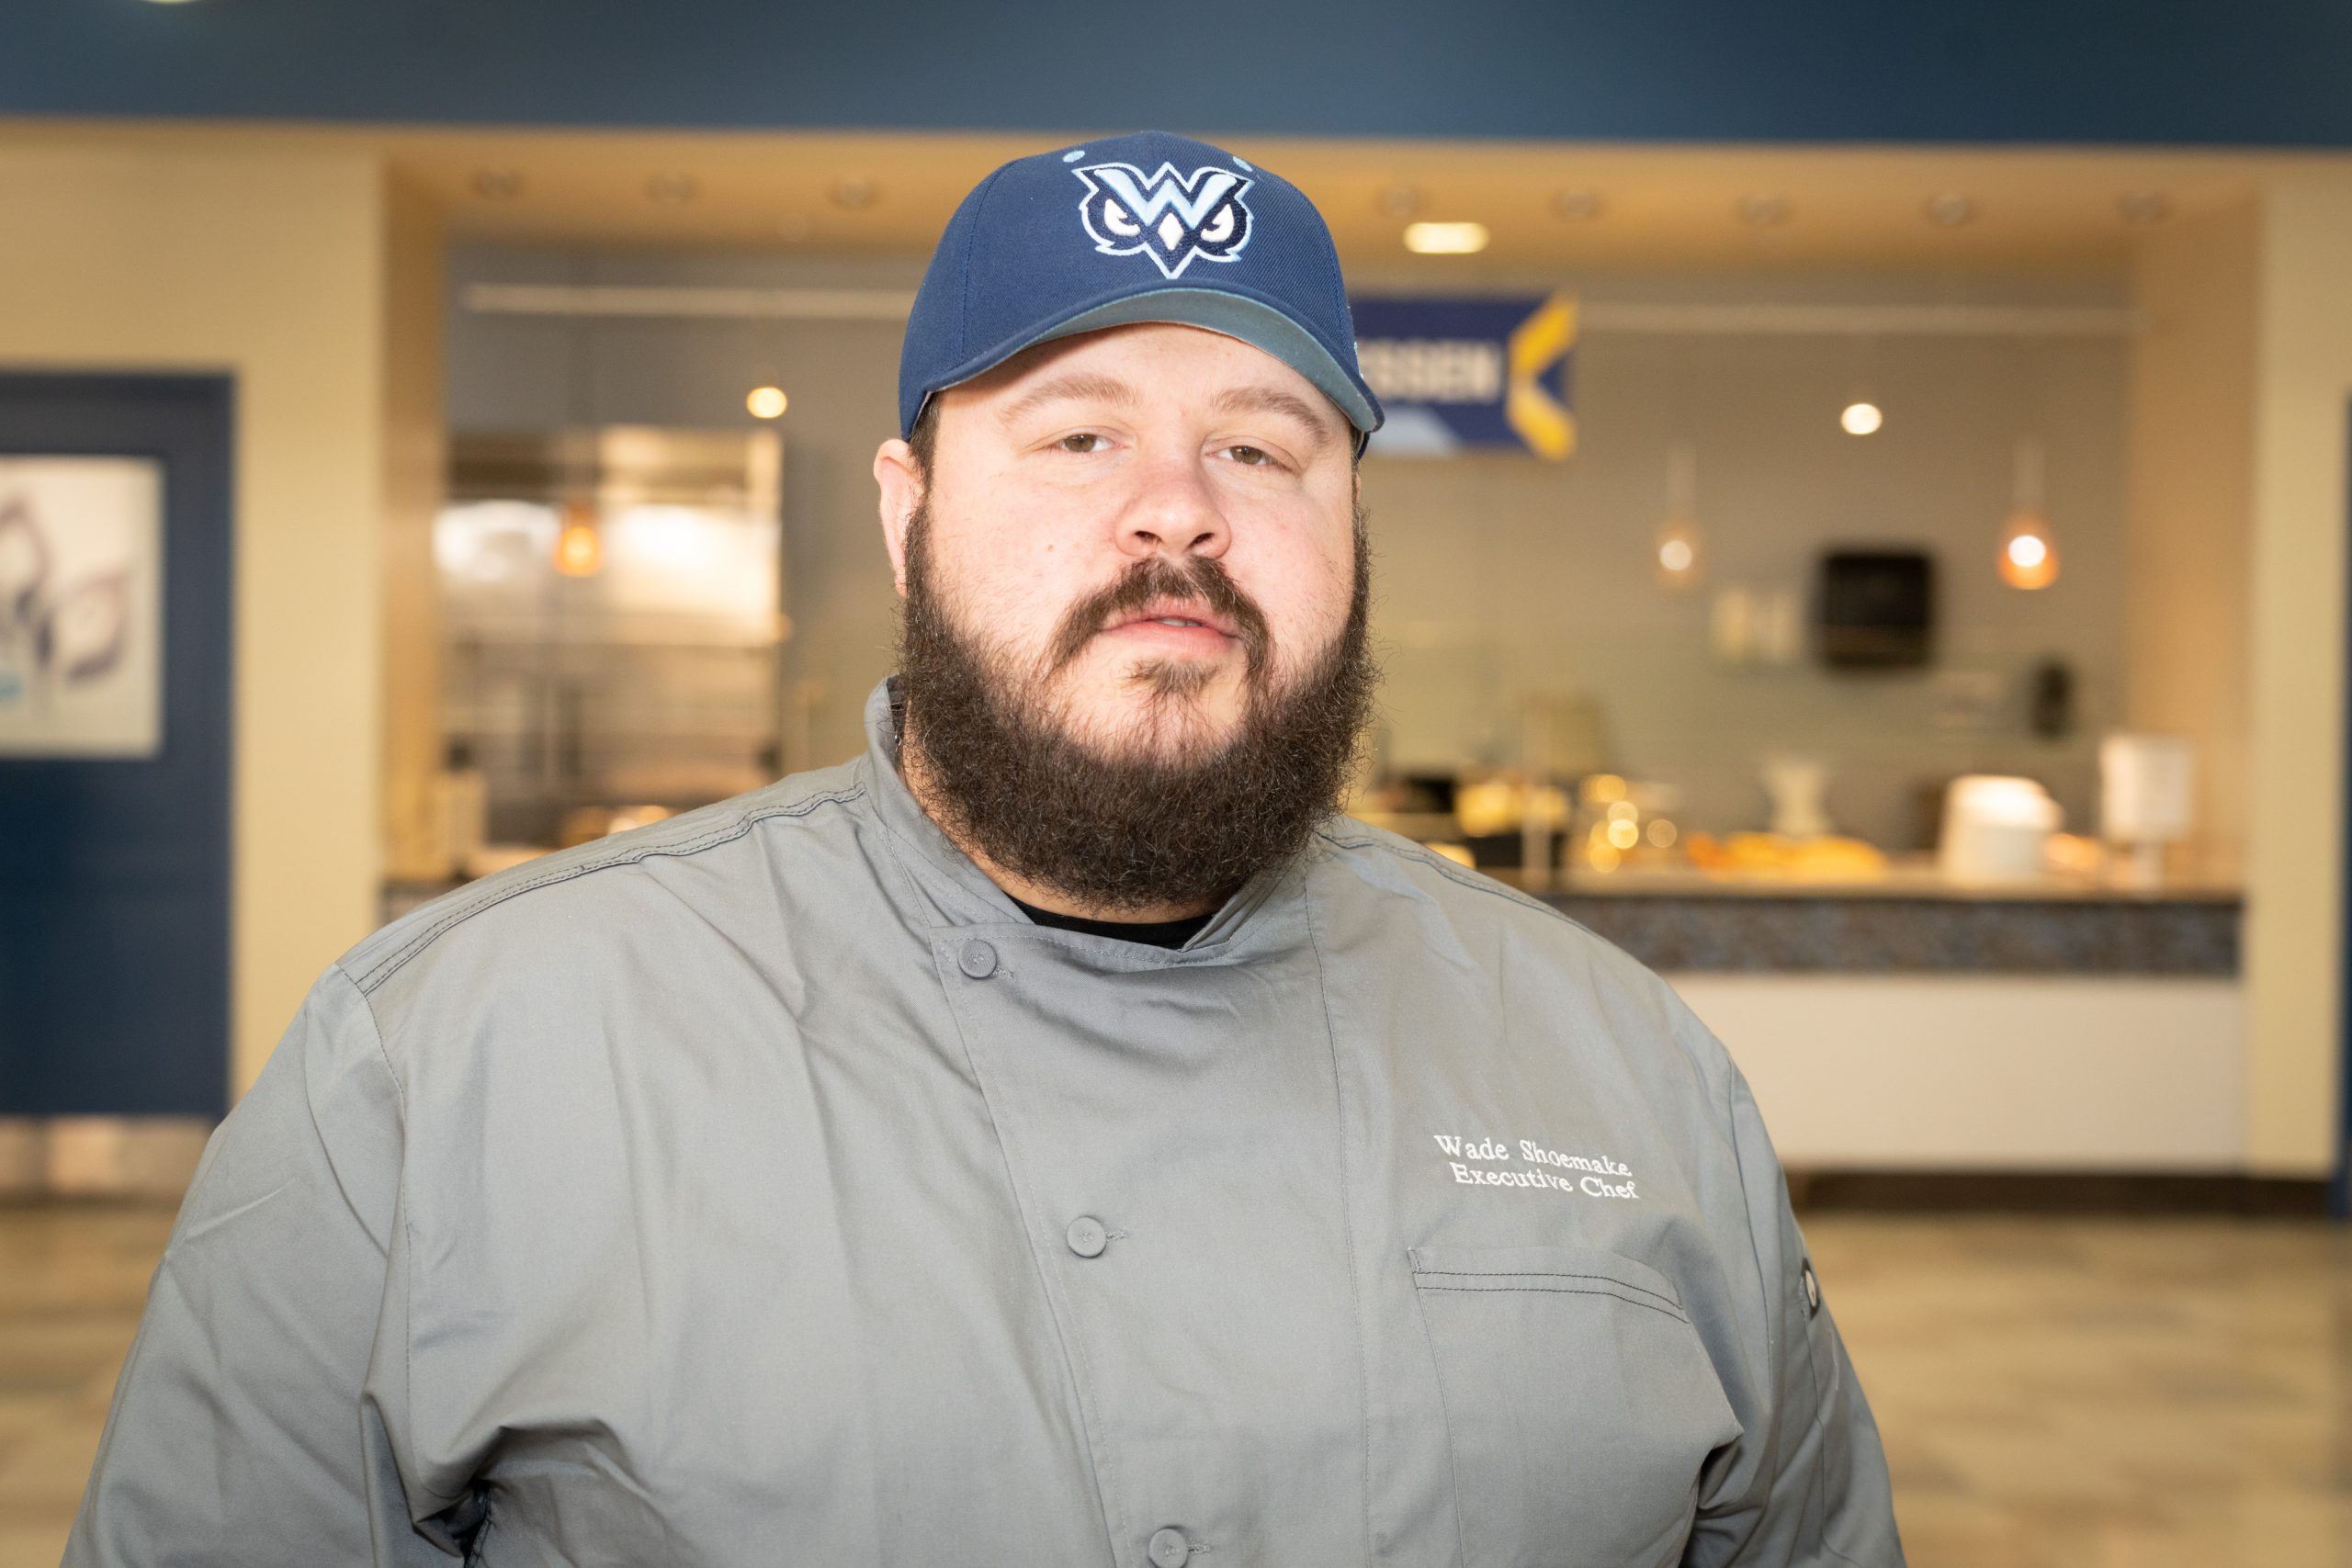 The W welcomes Executive Chef Wade Shoemake to campus culinary team